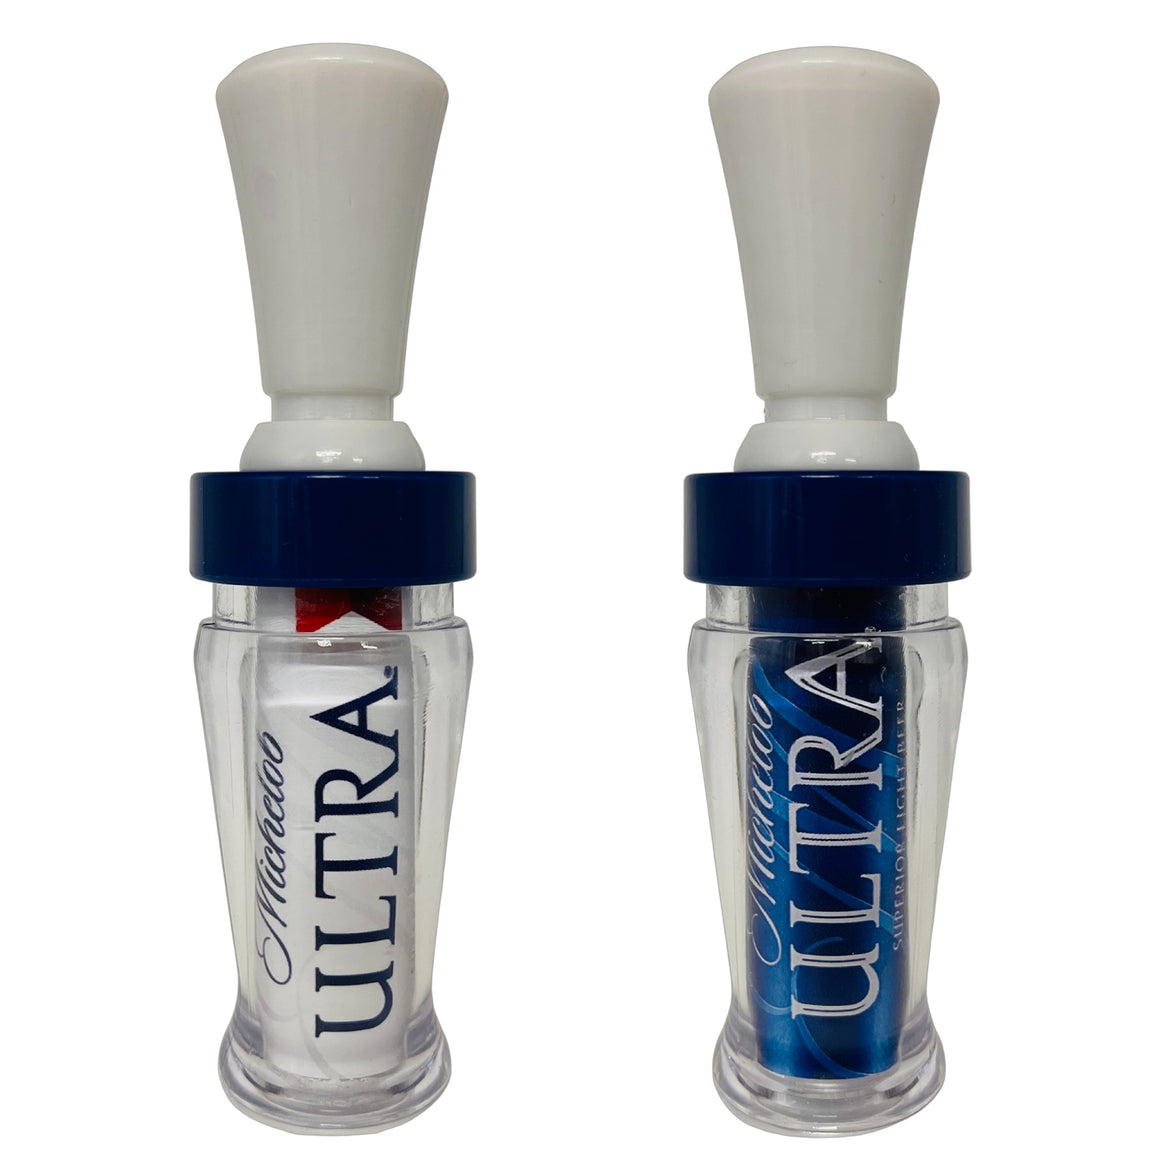 POLYCARBONATE IMAGE DUCK CALL MIC ULTRA